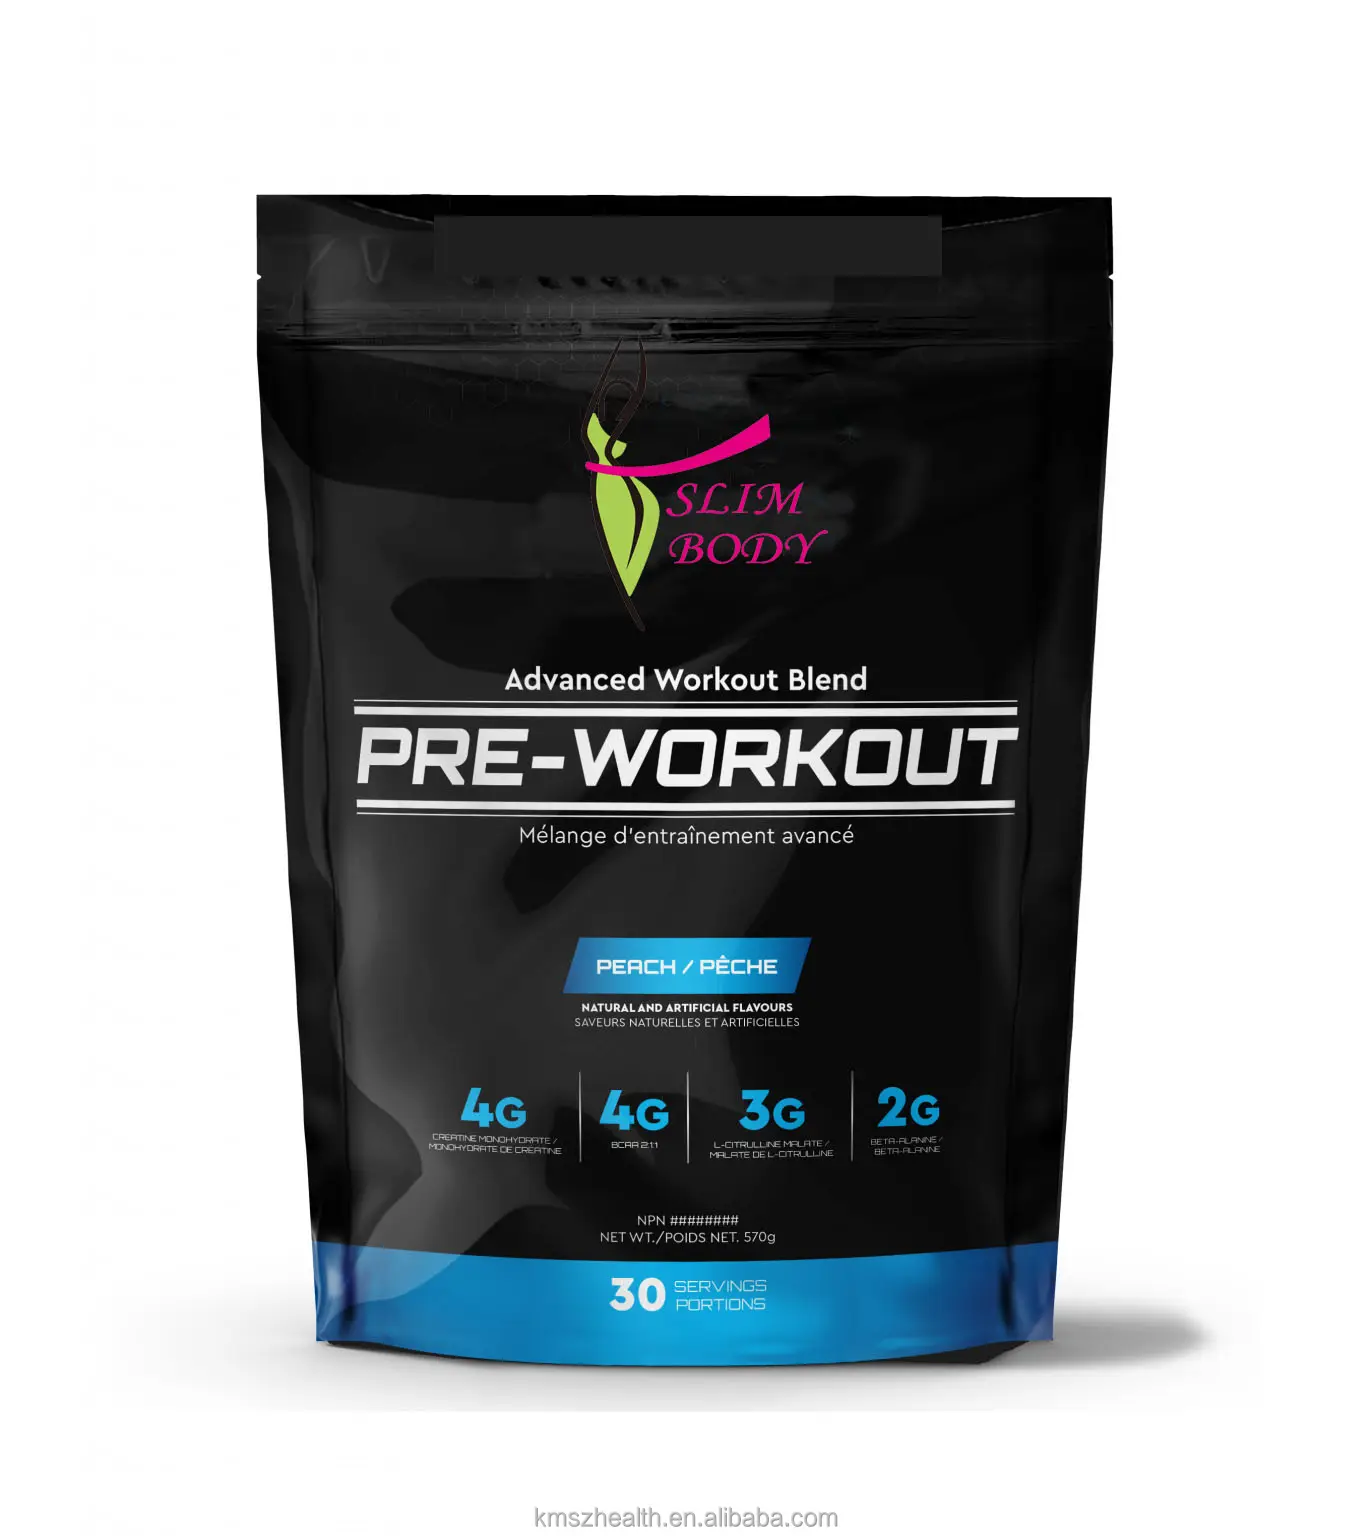 Huge Supplements Wrecked Pre-Workout Powder healthy Ingredients Per Serving to Boost Energy